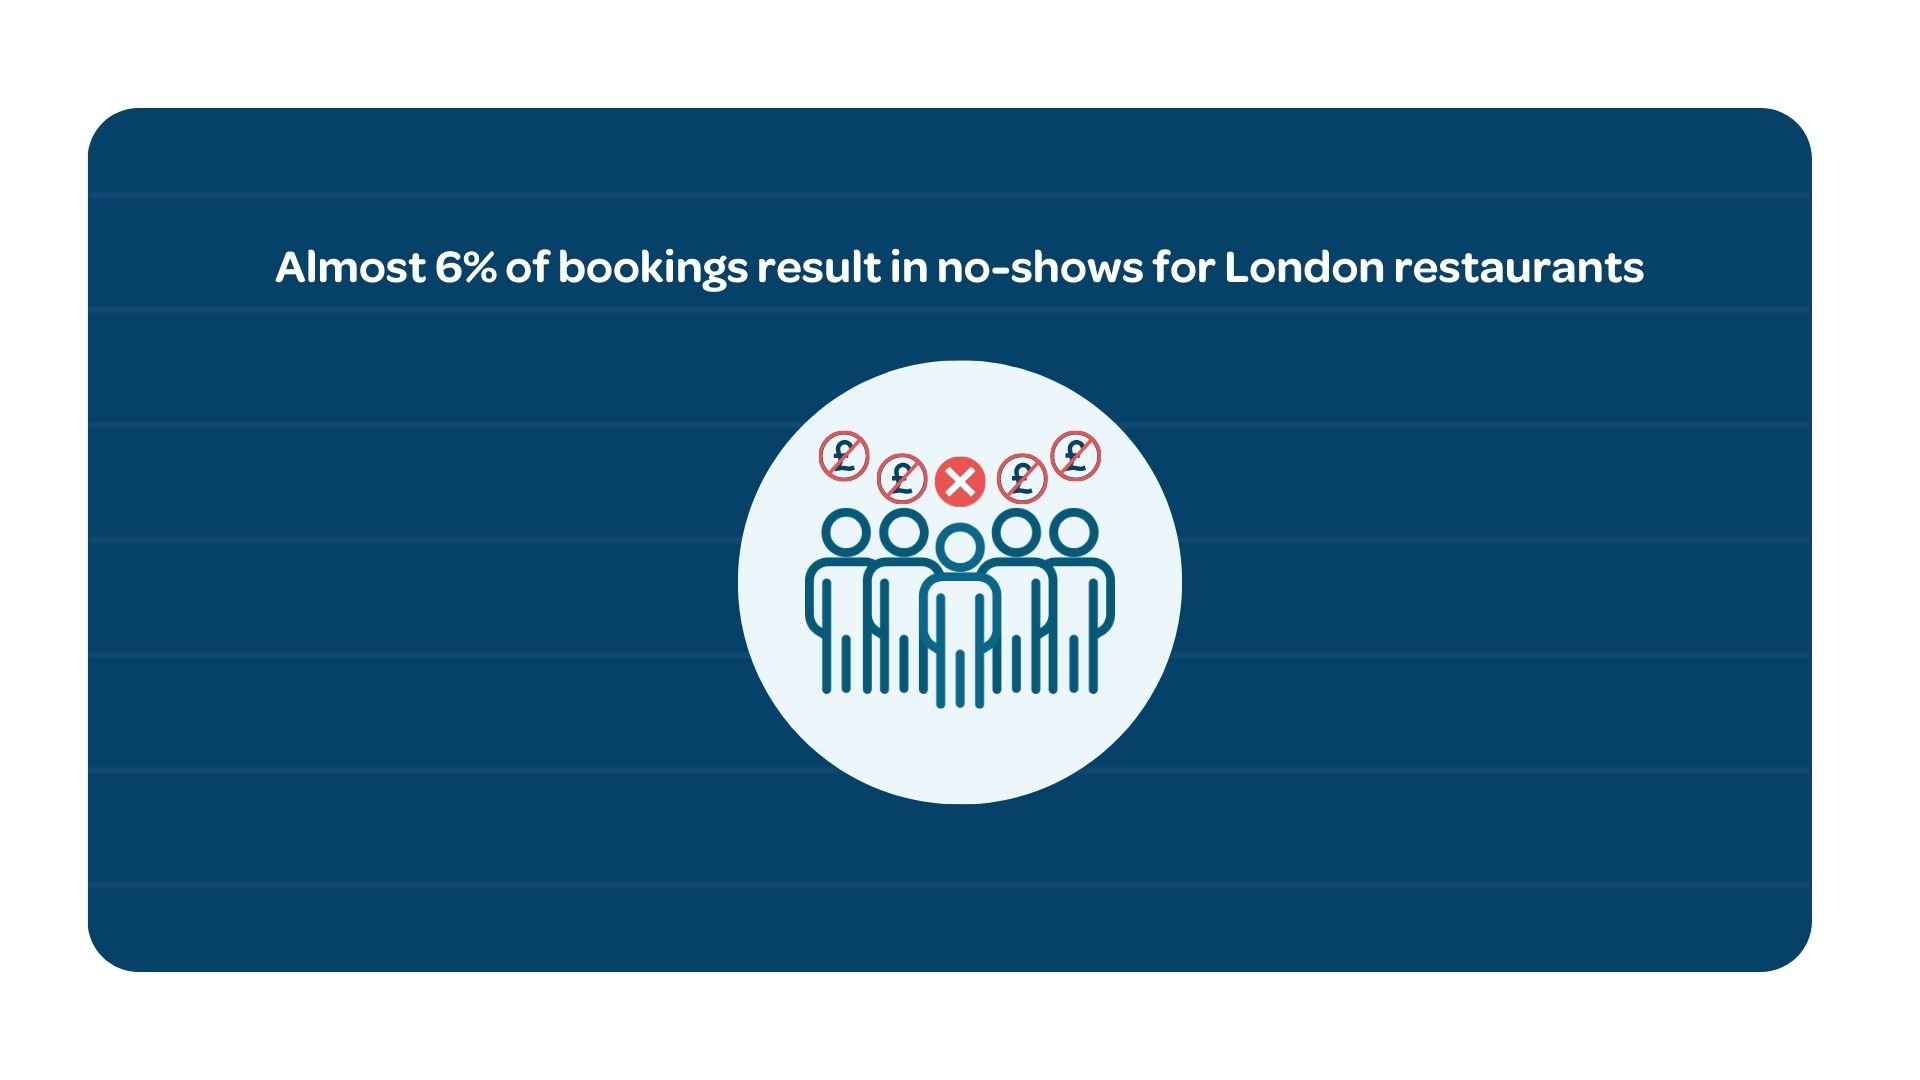 Almost 6% of bookings result in no-shows for London restaurants